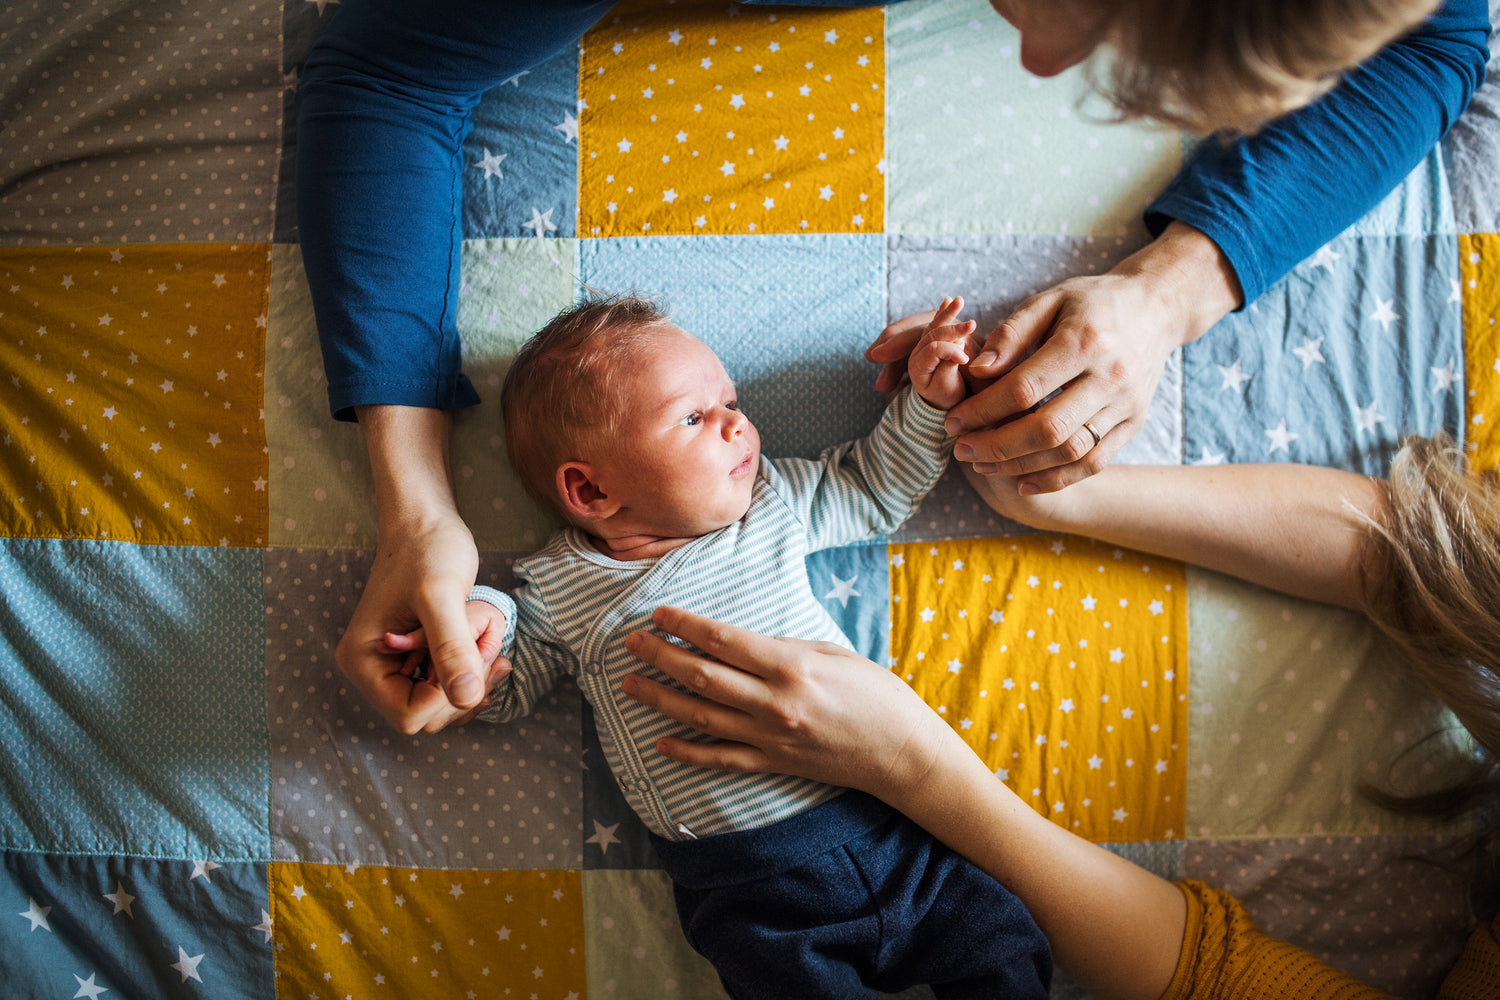 Important Things to Remember When Caring for Your Baby’s Skin, Hair and Nails